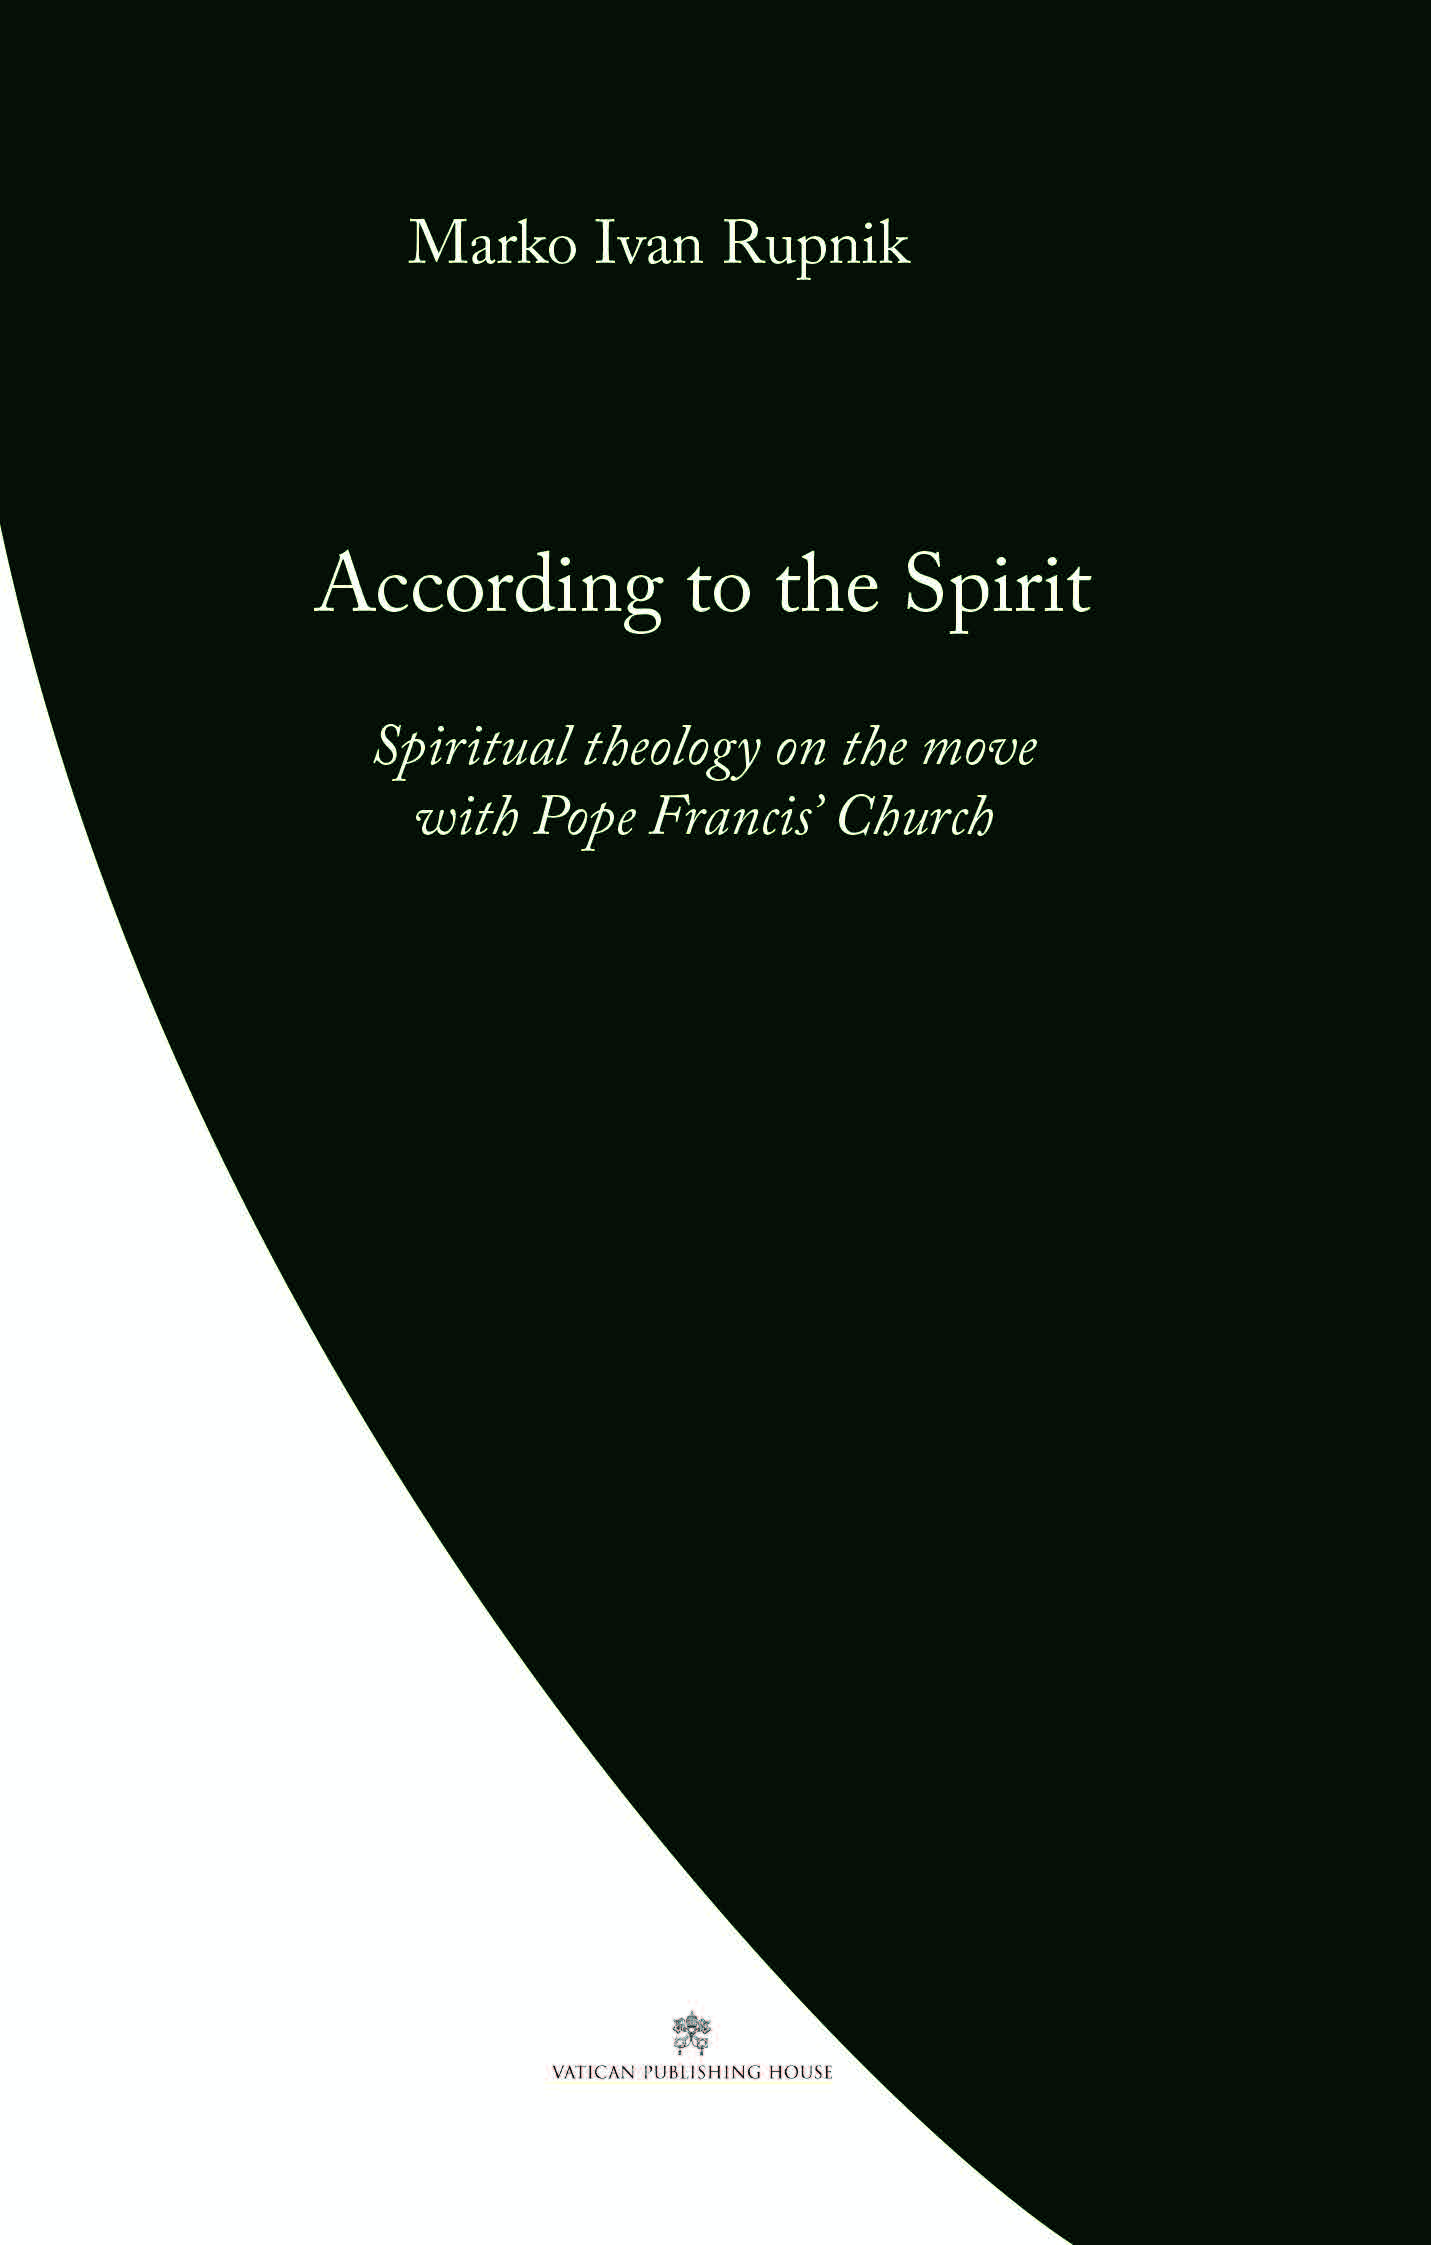 According to the Spirit  Spiritual theology on the move with Pope Francis' Church / Marko Ivan Rupnik